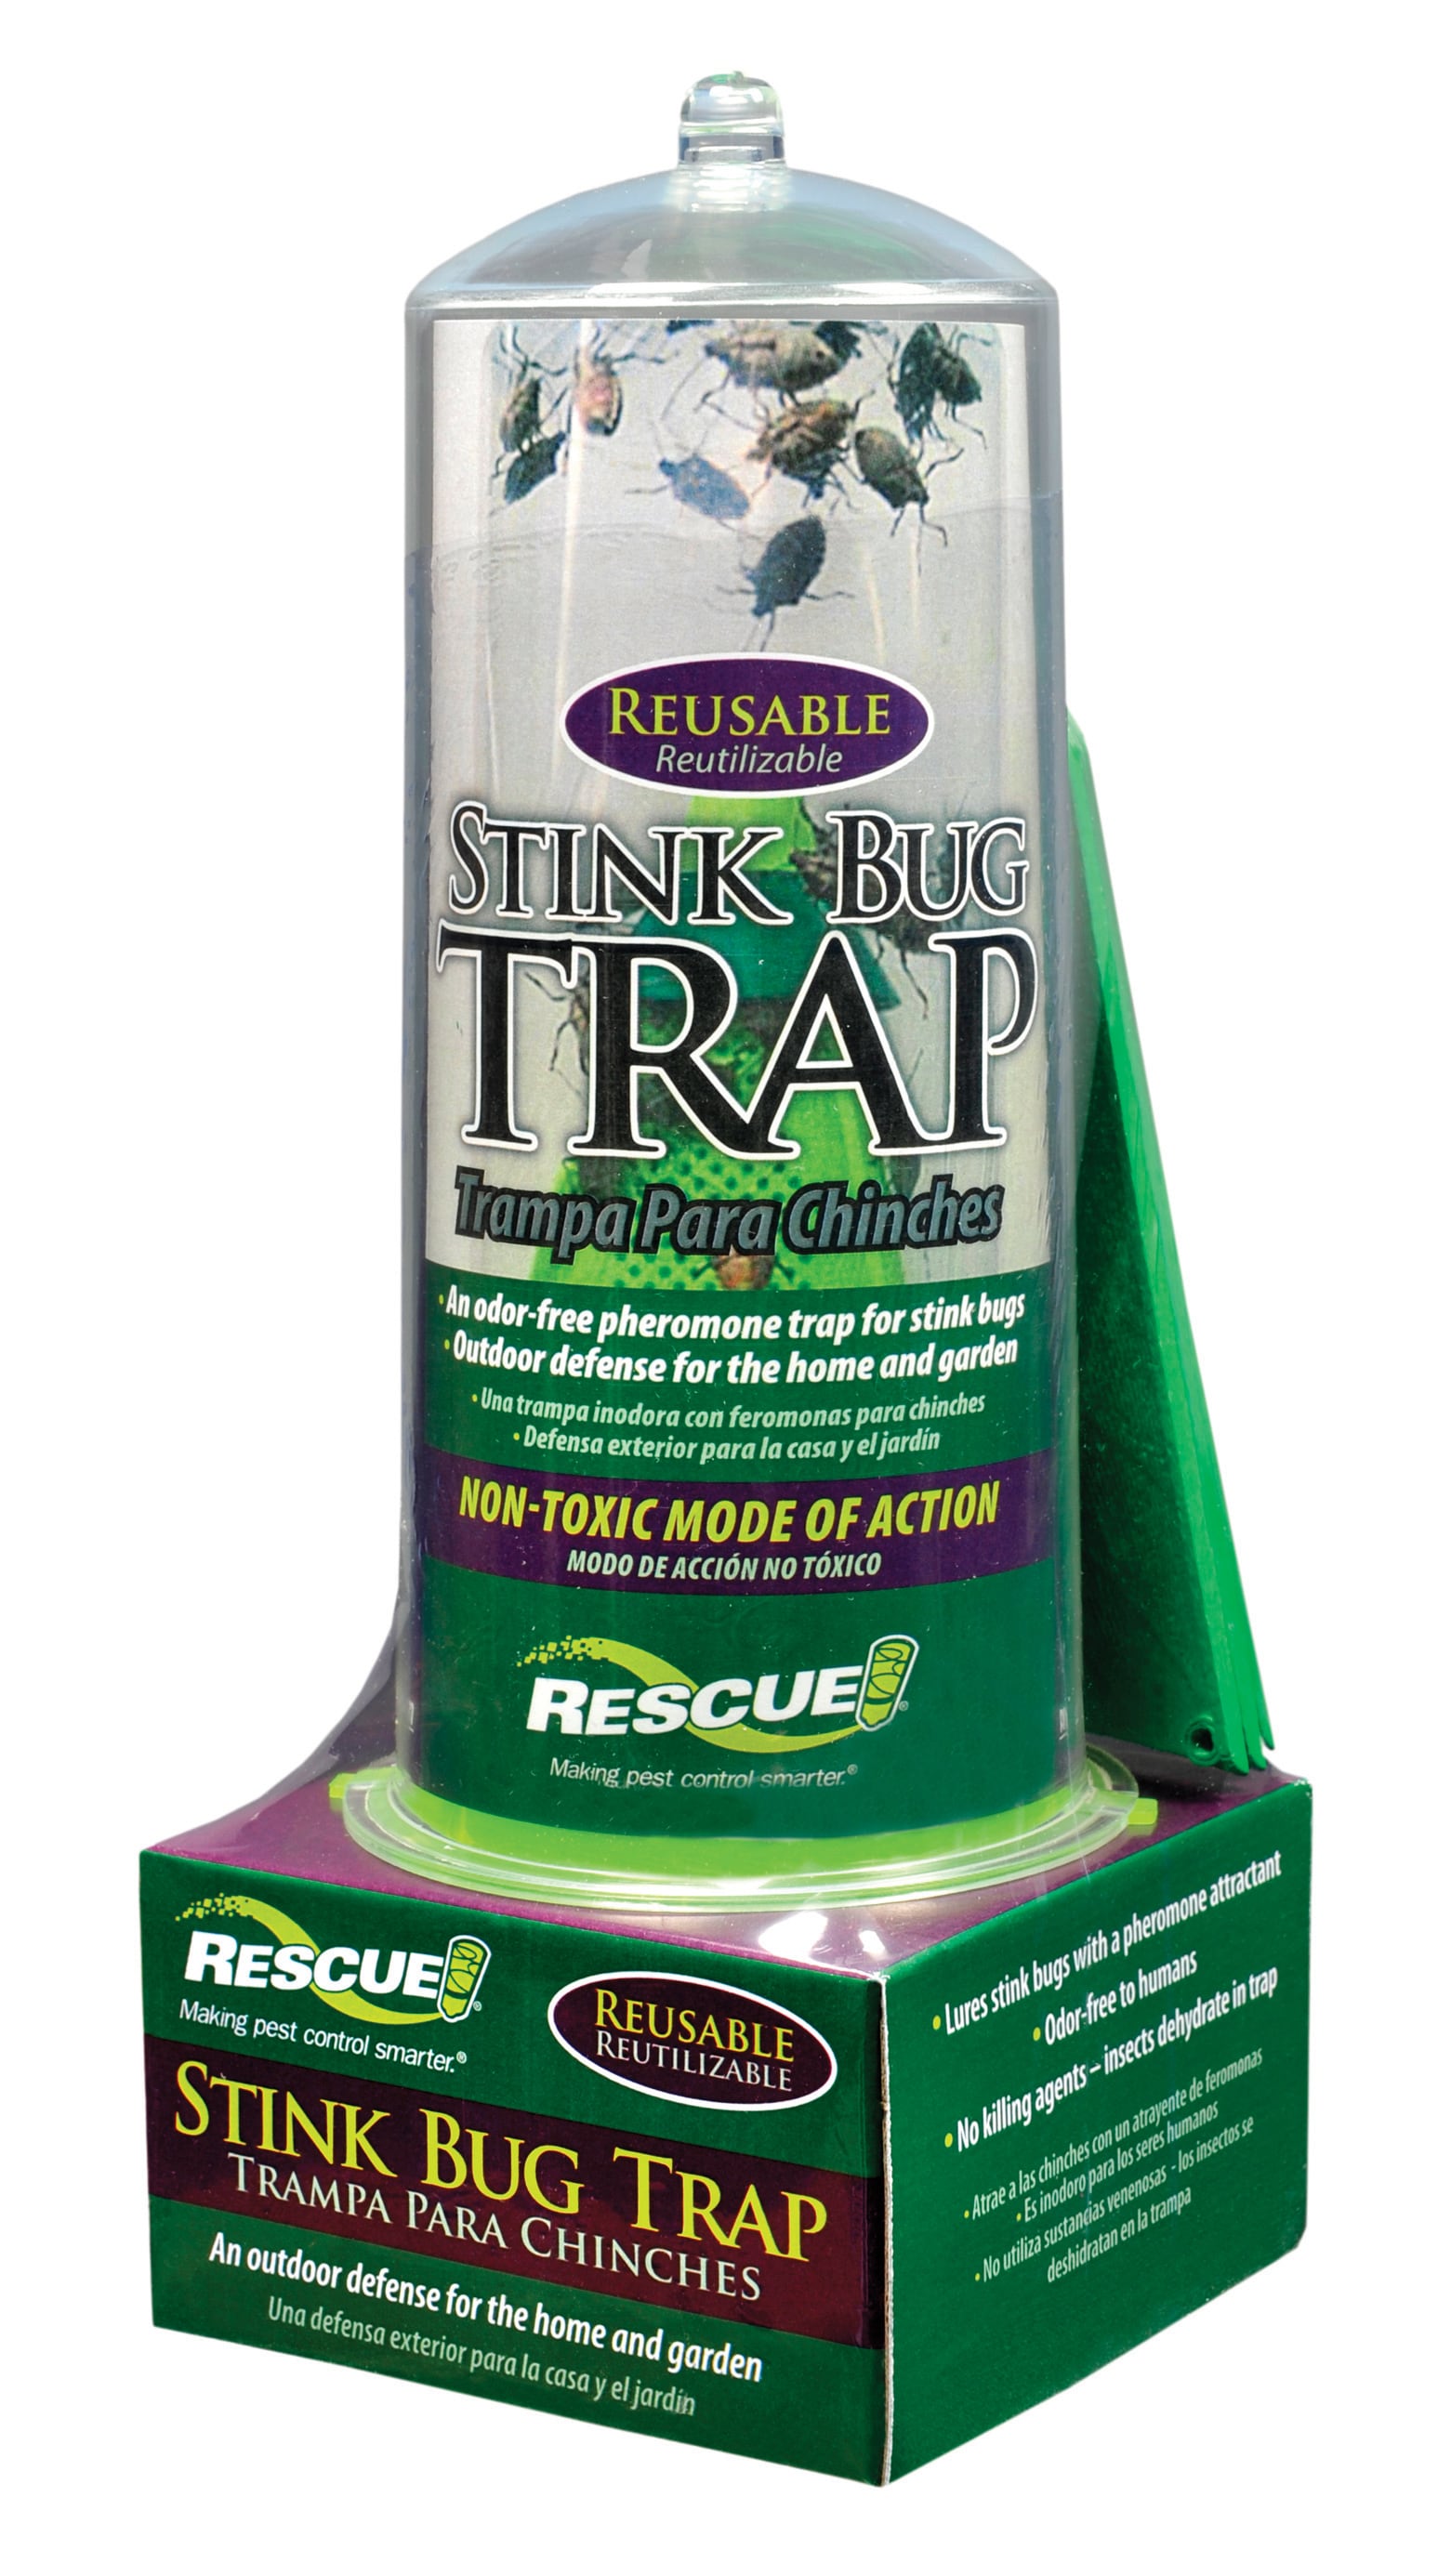 Non-Toxic Indoor Insect Traps